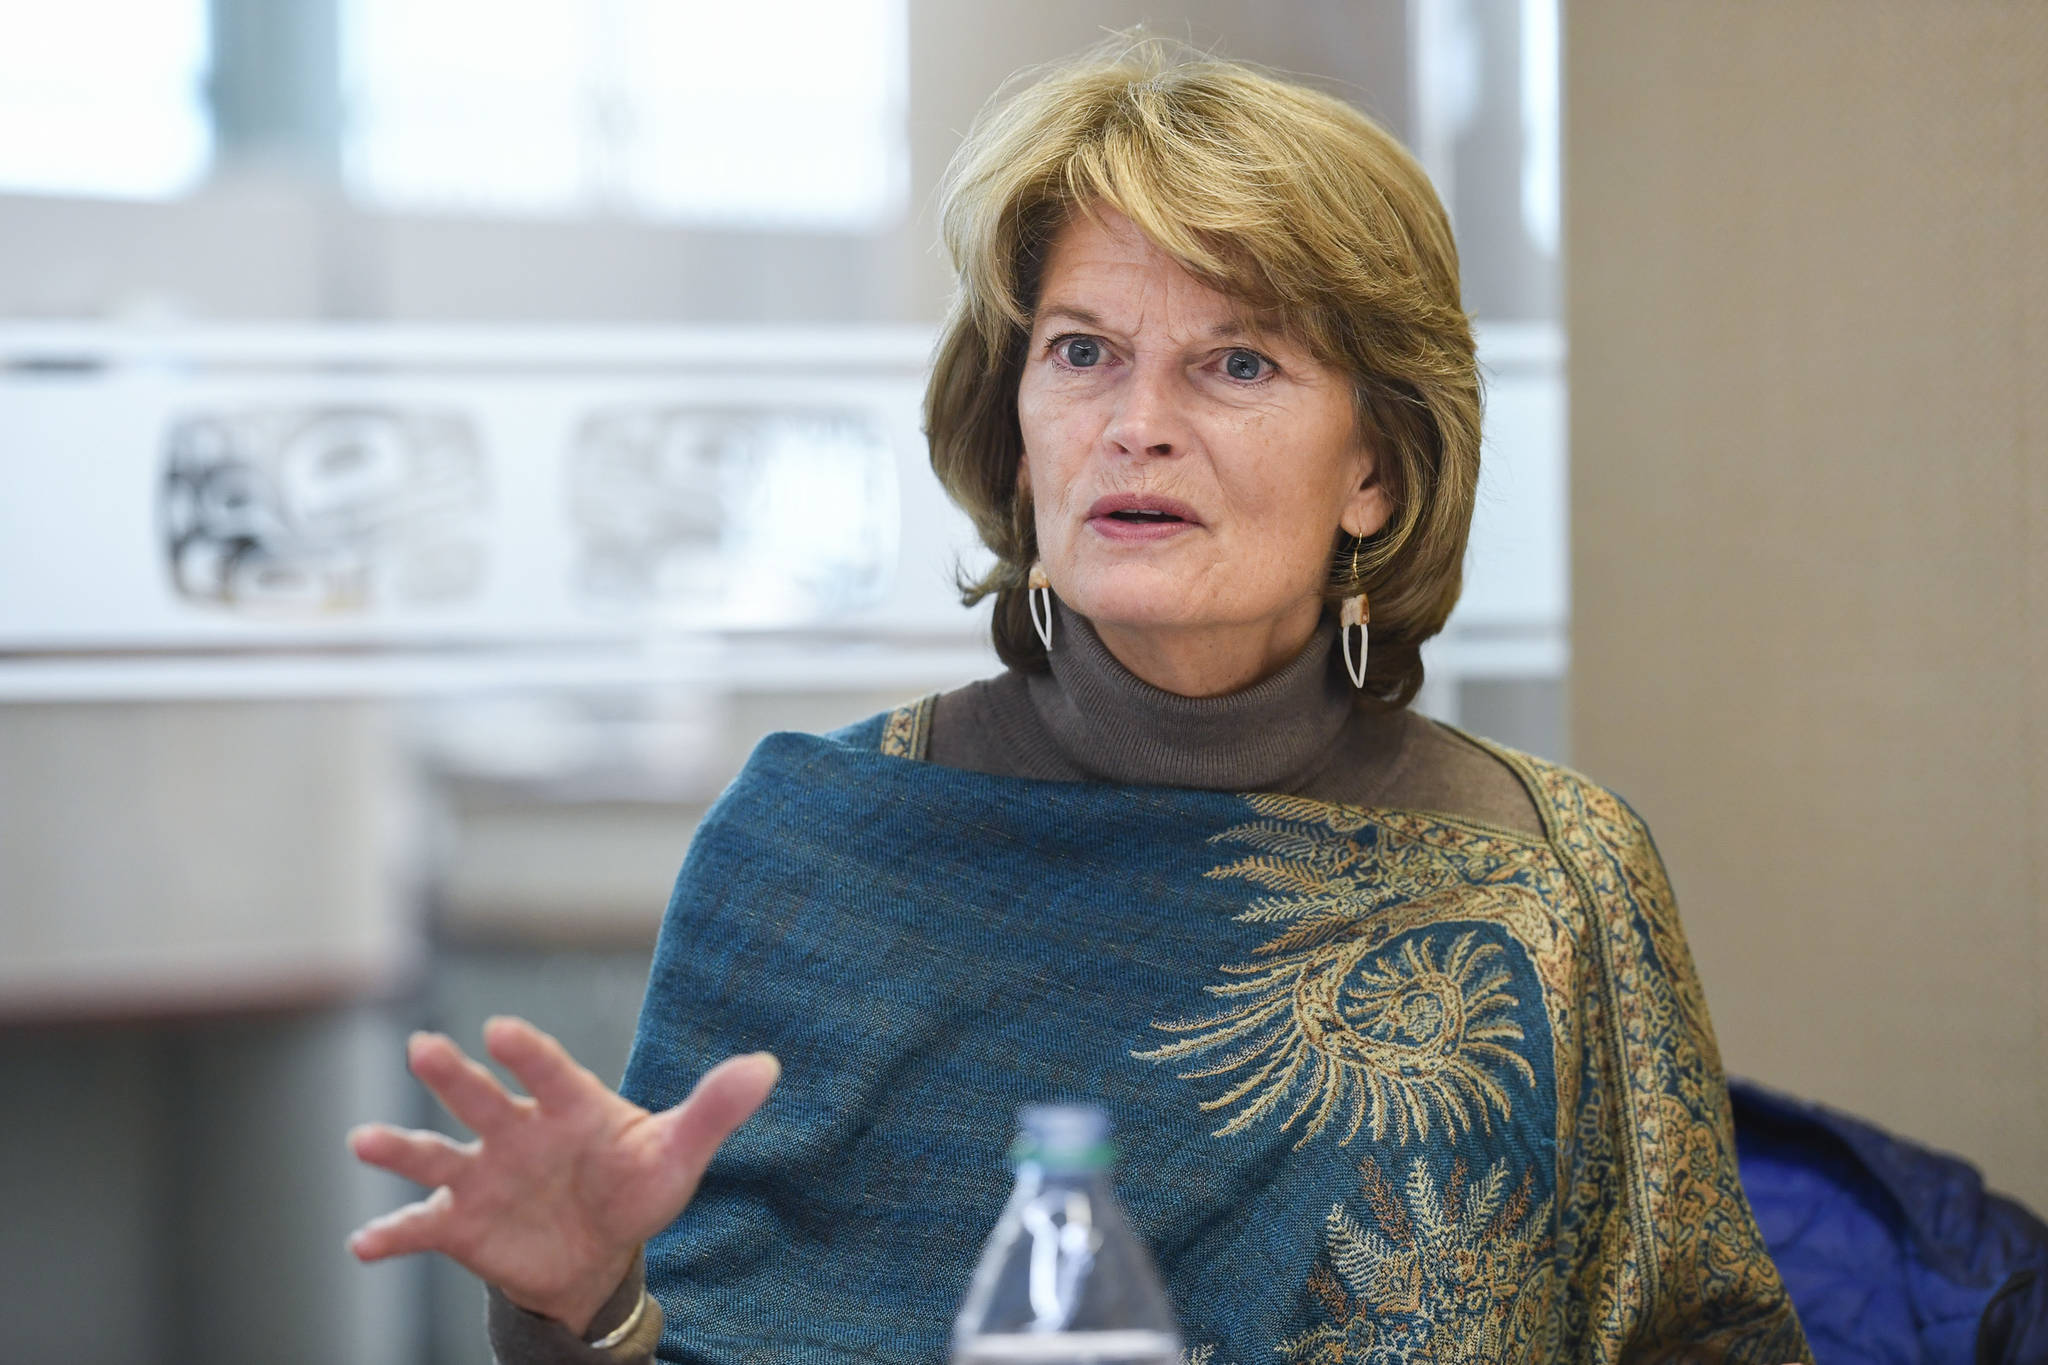 Murkowski knocks Green New Deal’s ‘impossible’ timeline, wary of ‘PFD over everything else’